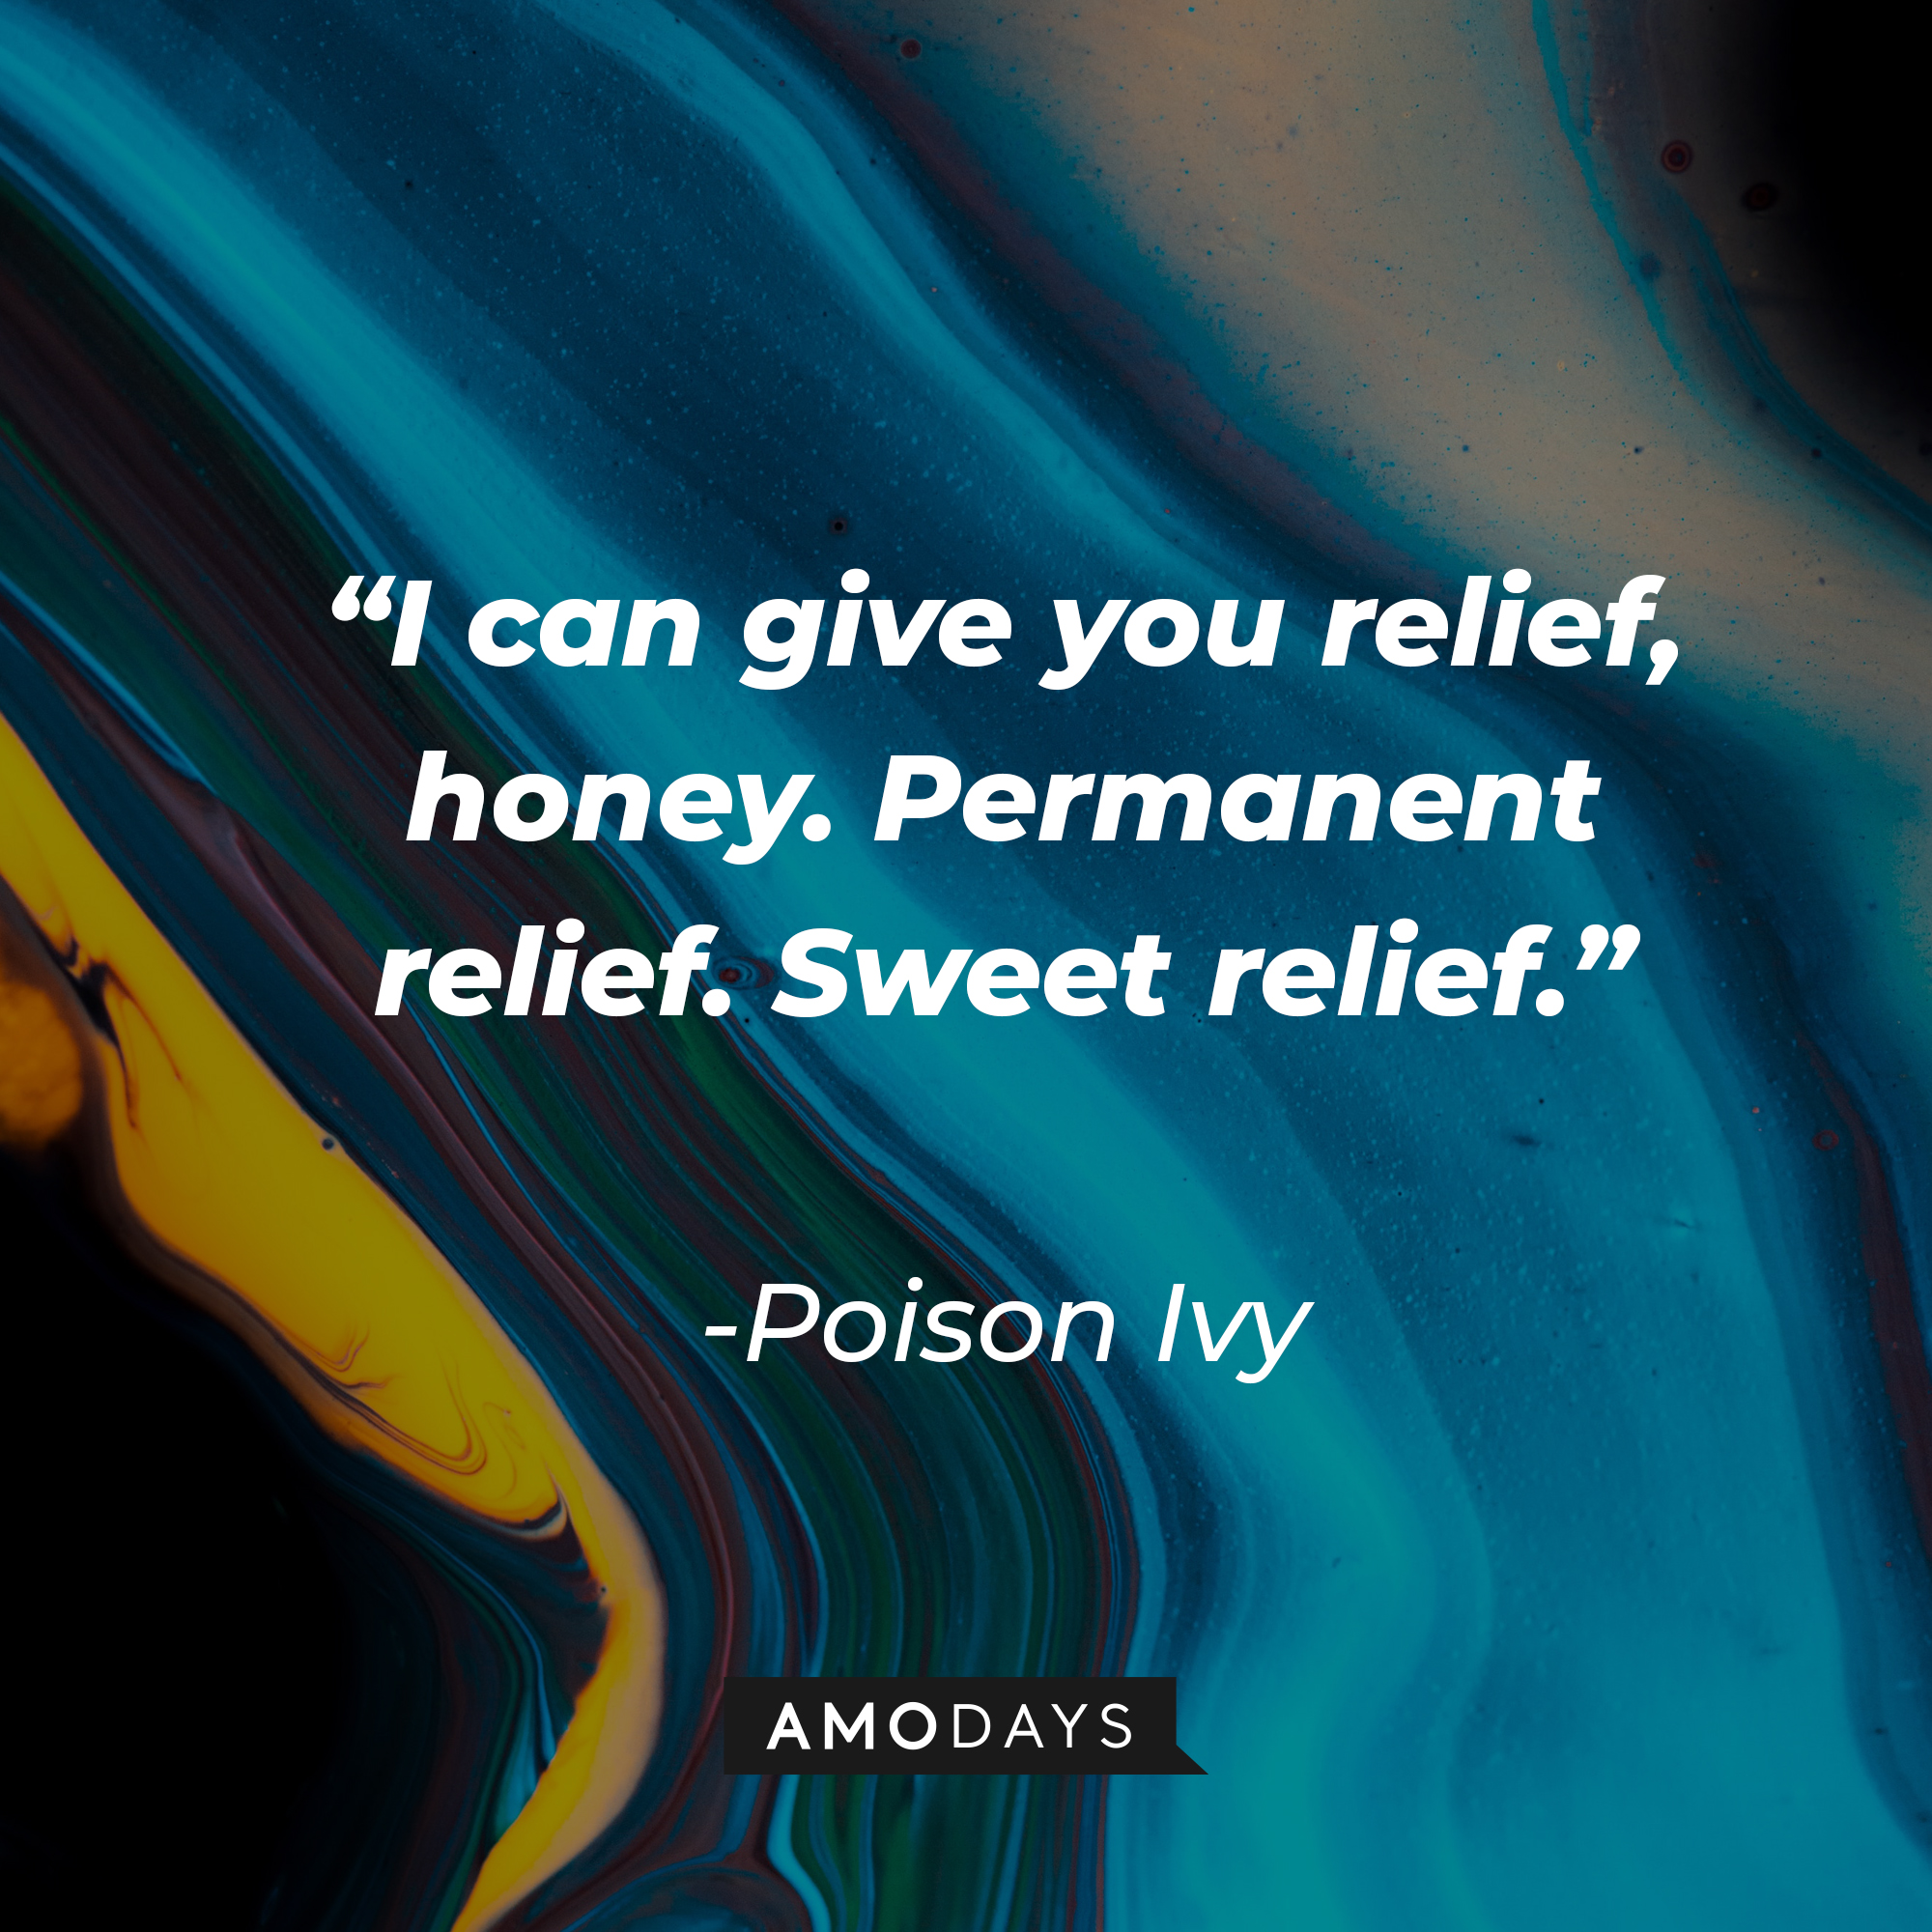 Poison Ivy’s quote: “I can give you relief, honey. Permanent relief. Sweet relief.” | Image: Unsplash